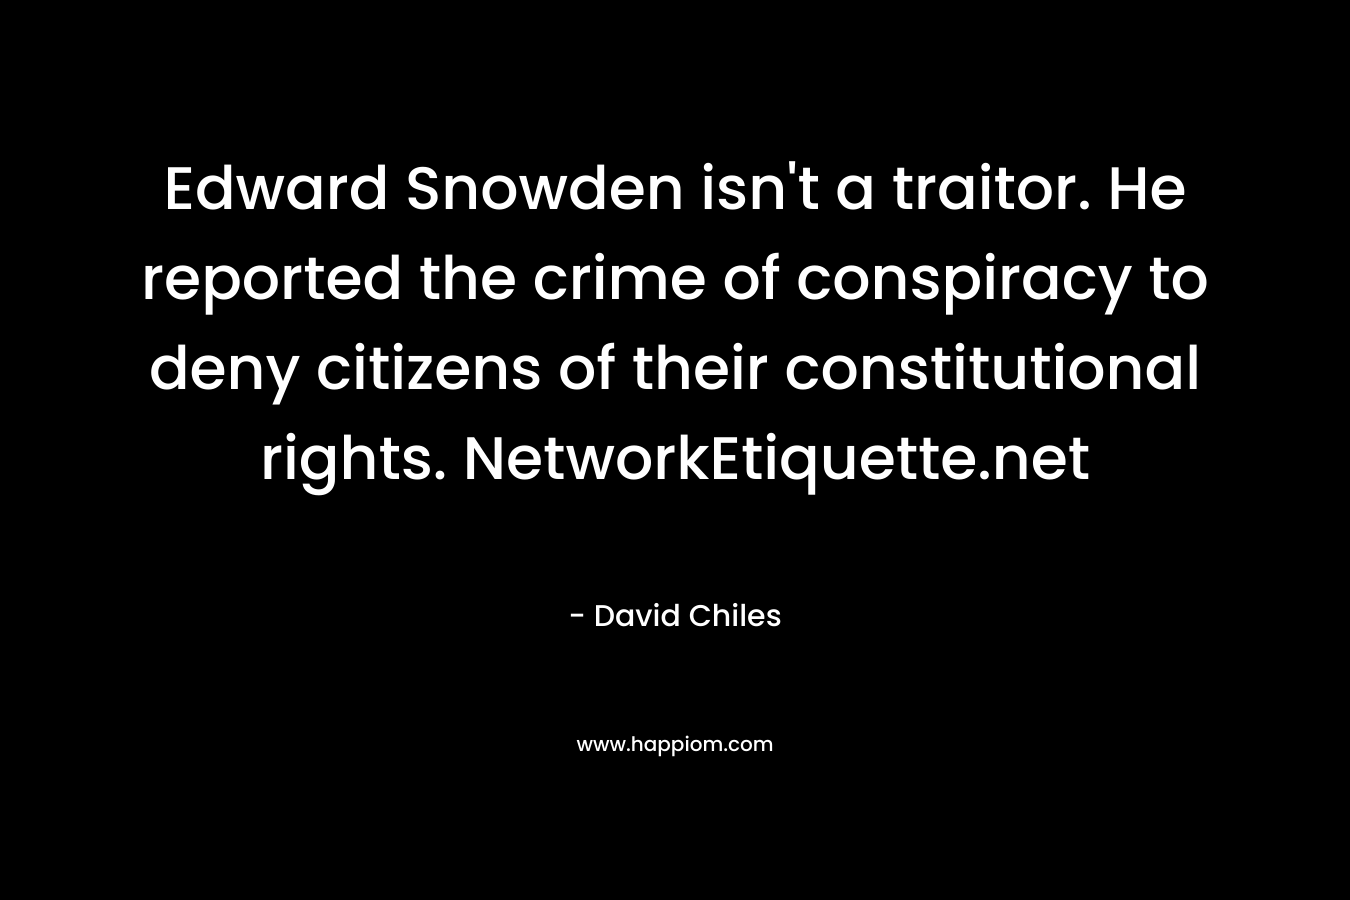 Edward Snowden isn't a traitor. He reported the crime of conspiracy to deny citizens of their constitutional rights. NetworkEtiquette.net